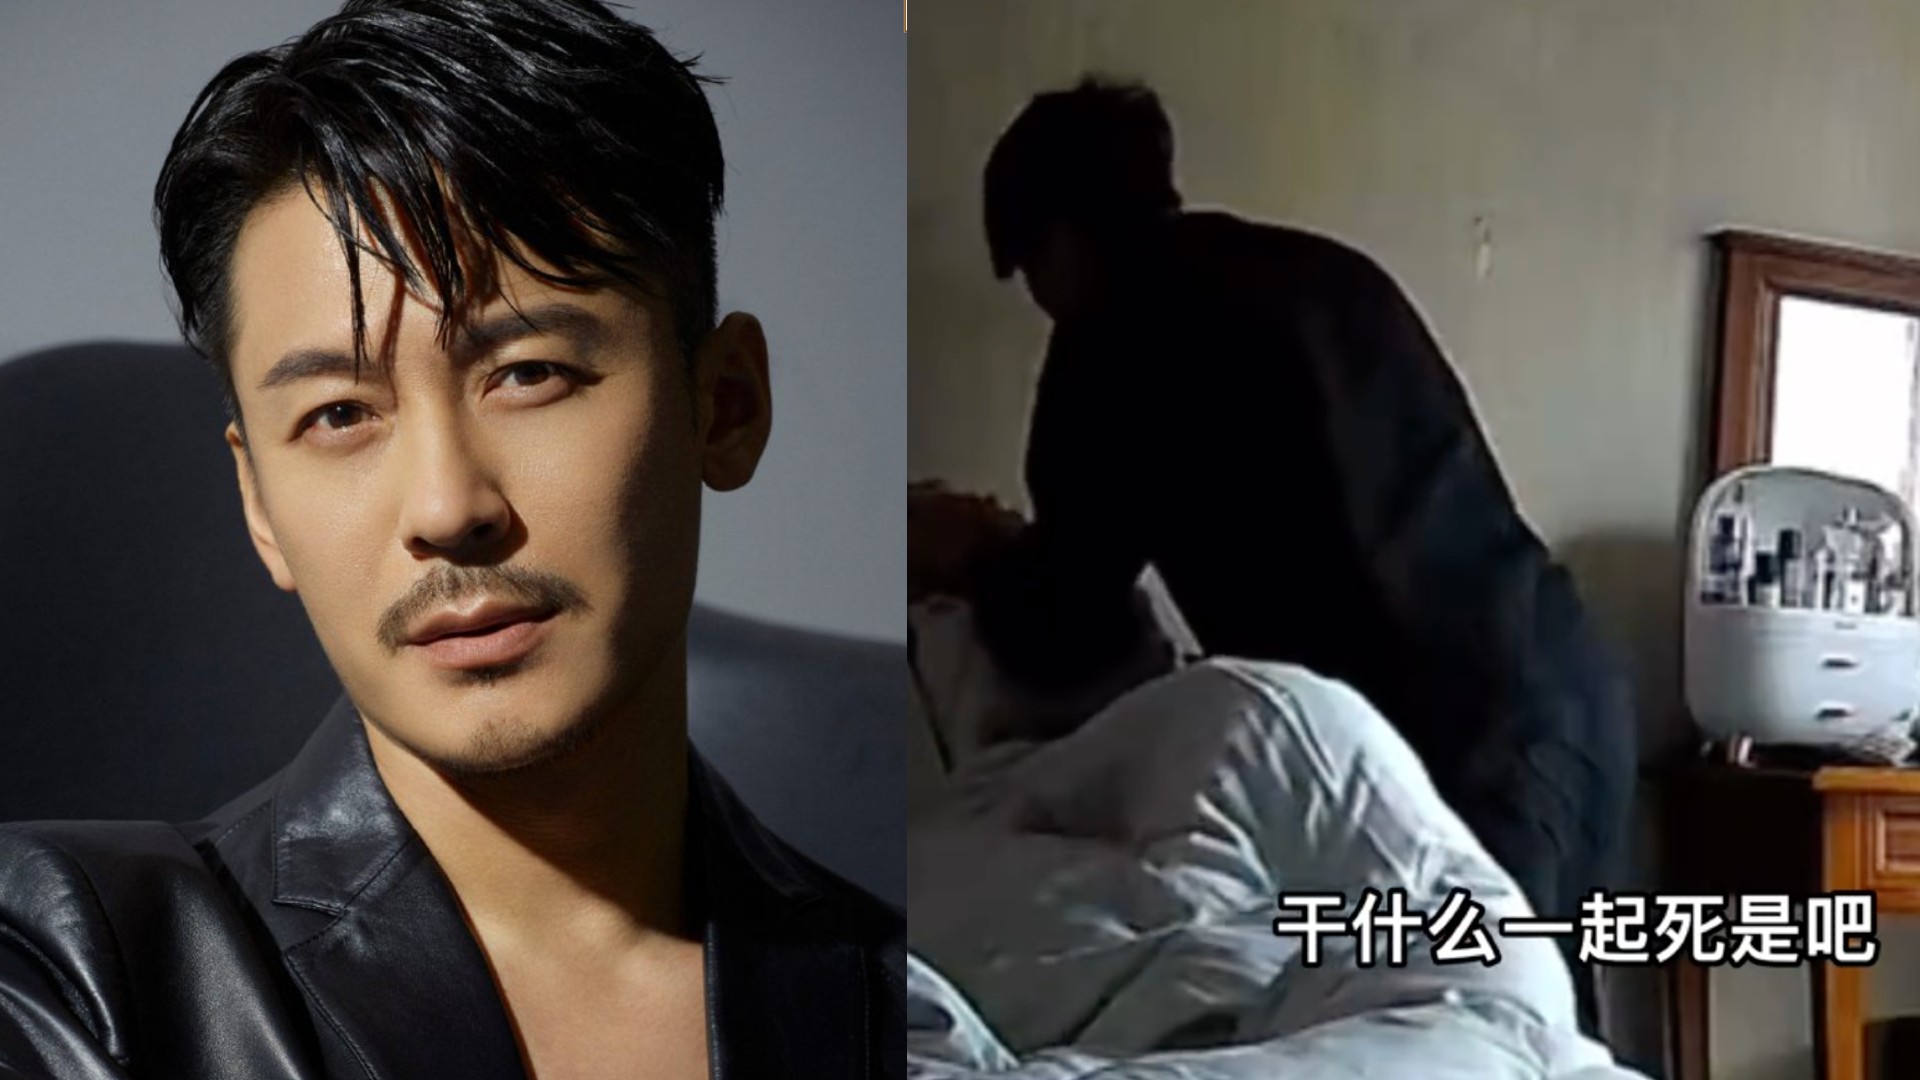 Chinese Actor Wang Dong'S 21-Year-Old Wife Posts Video Of Him Attacking And  Strangling Her - 8Days